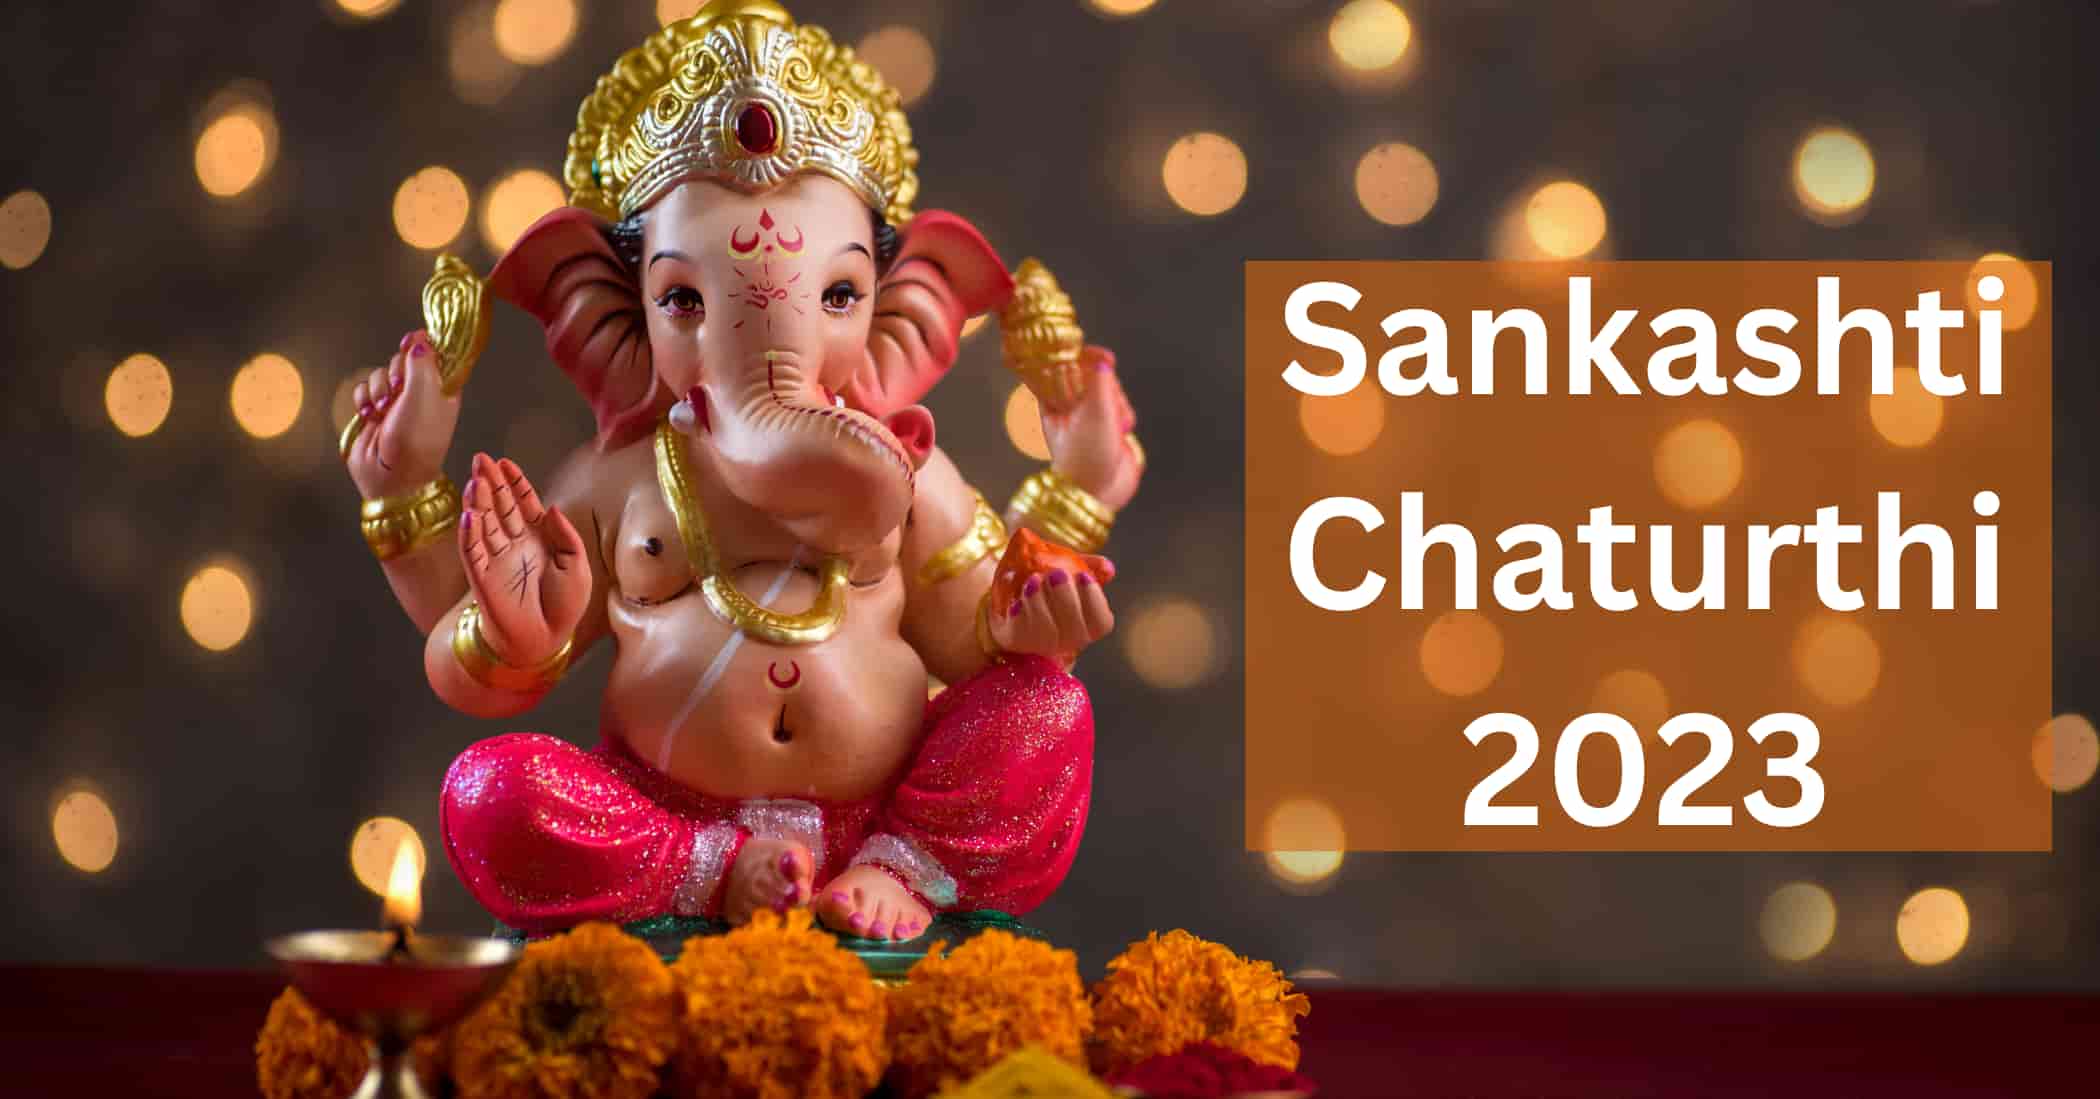 Sankashti Chaturthi 2023 List of Dates and Times -Complete Guide